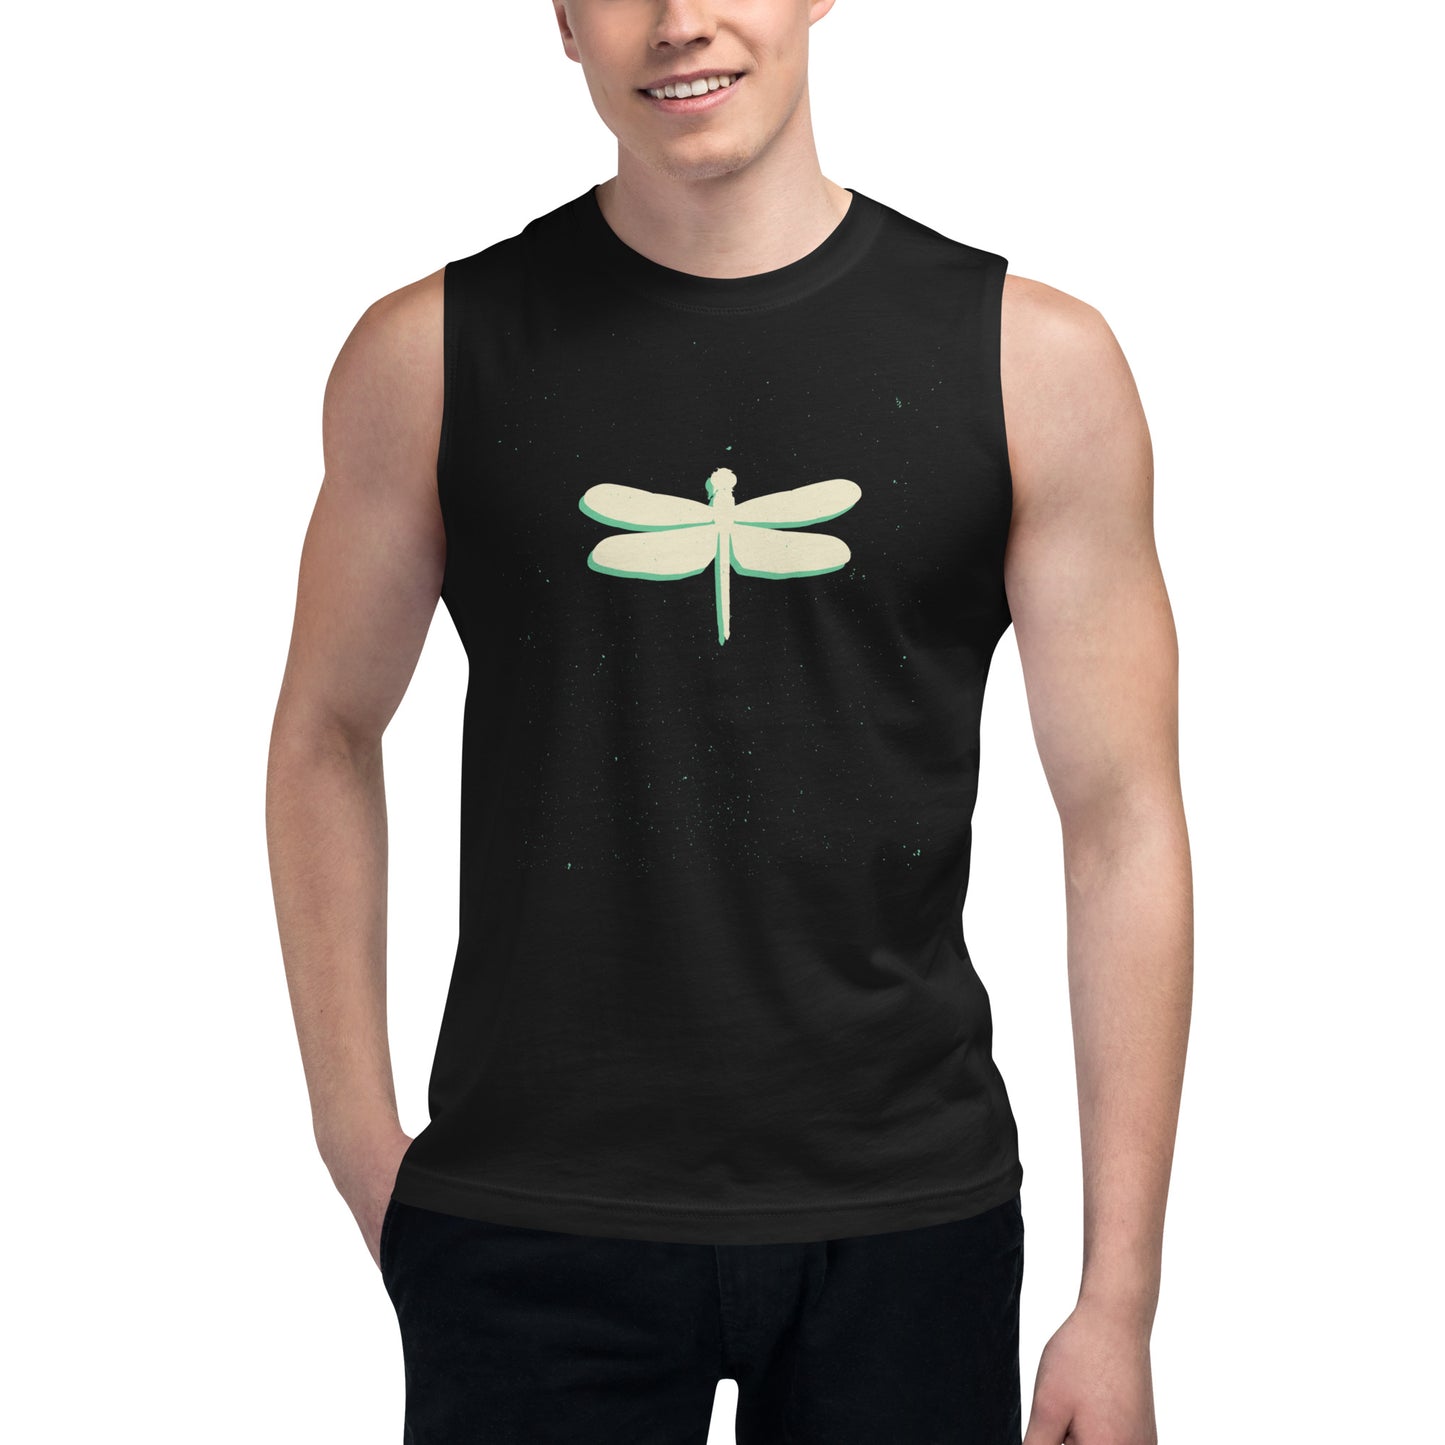 WE ARE MAGIC Muscle Shirt